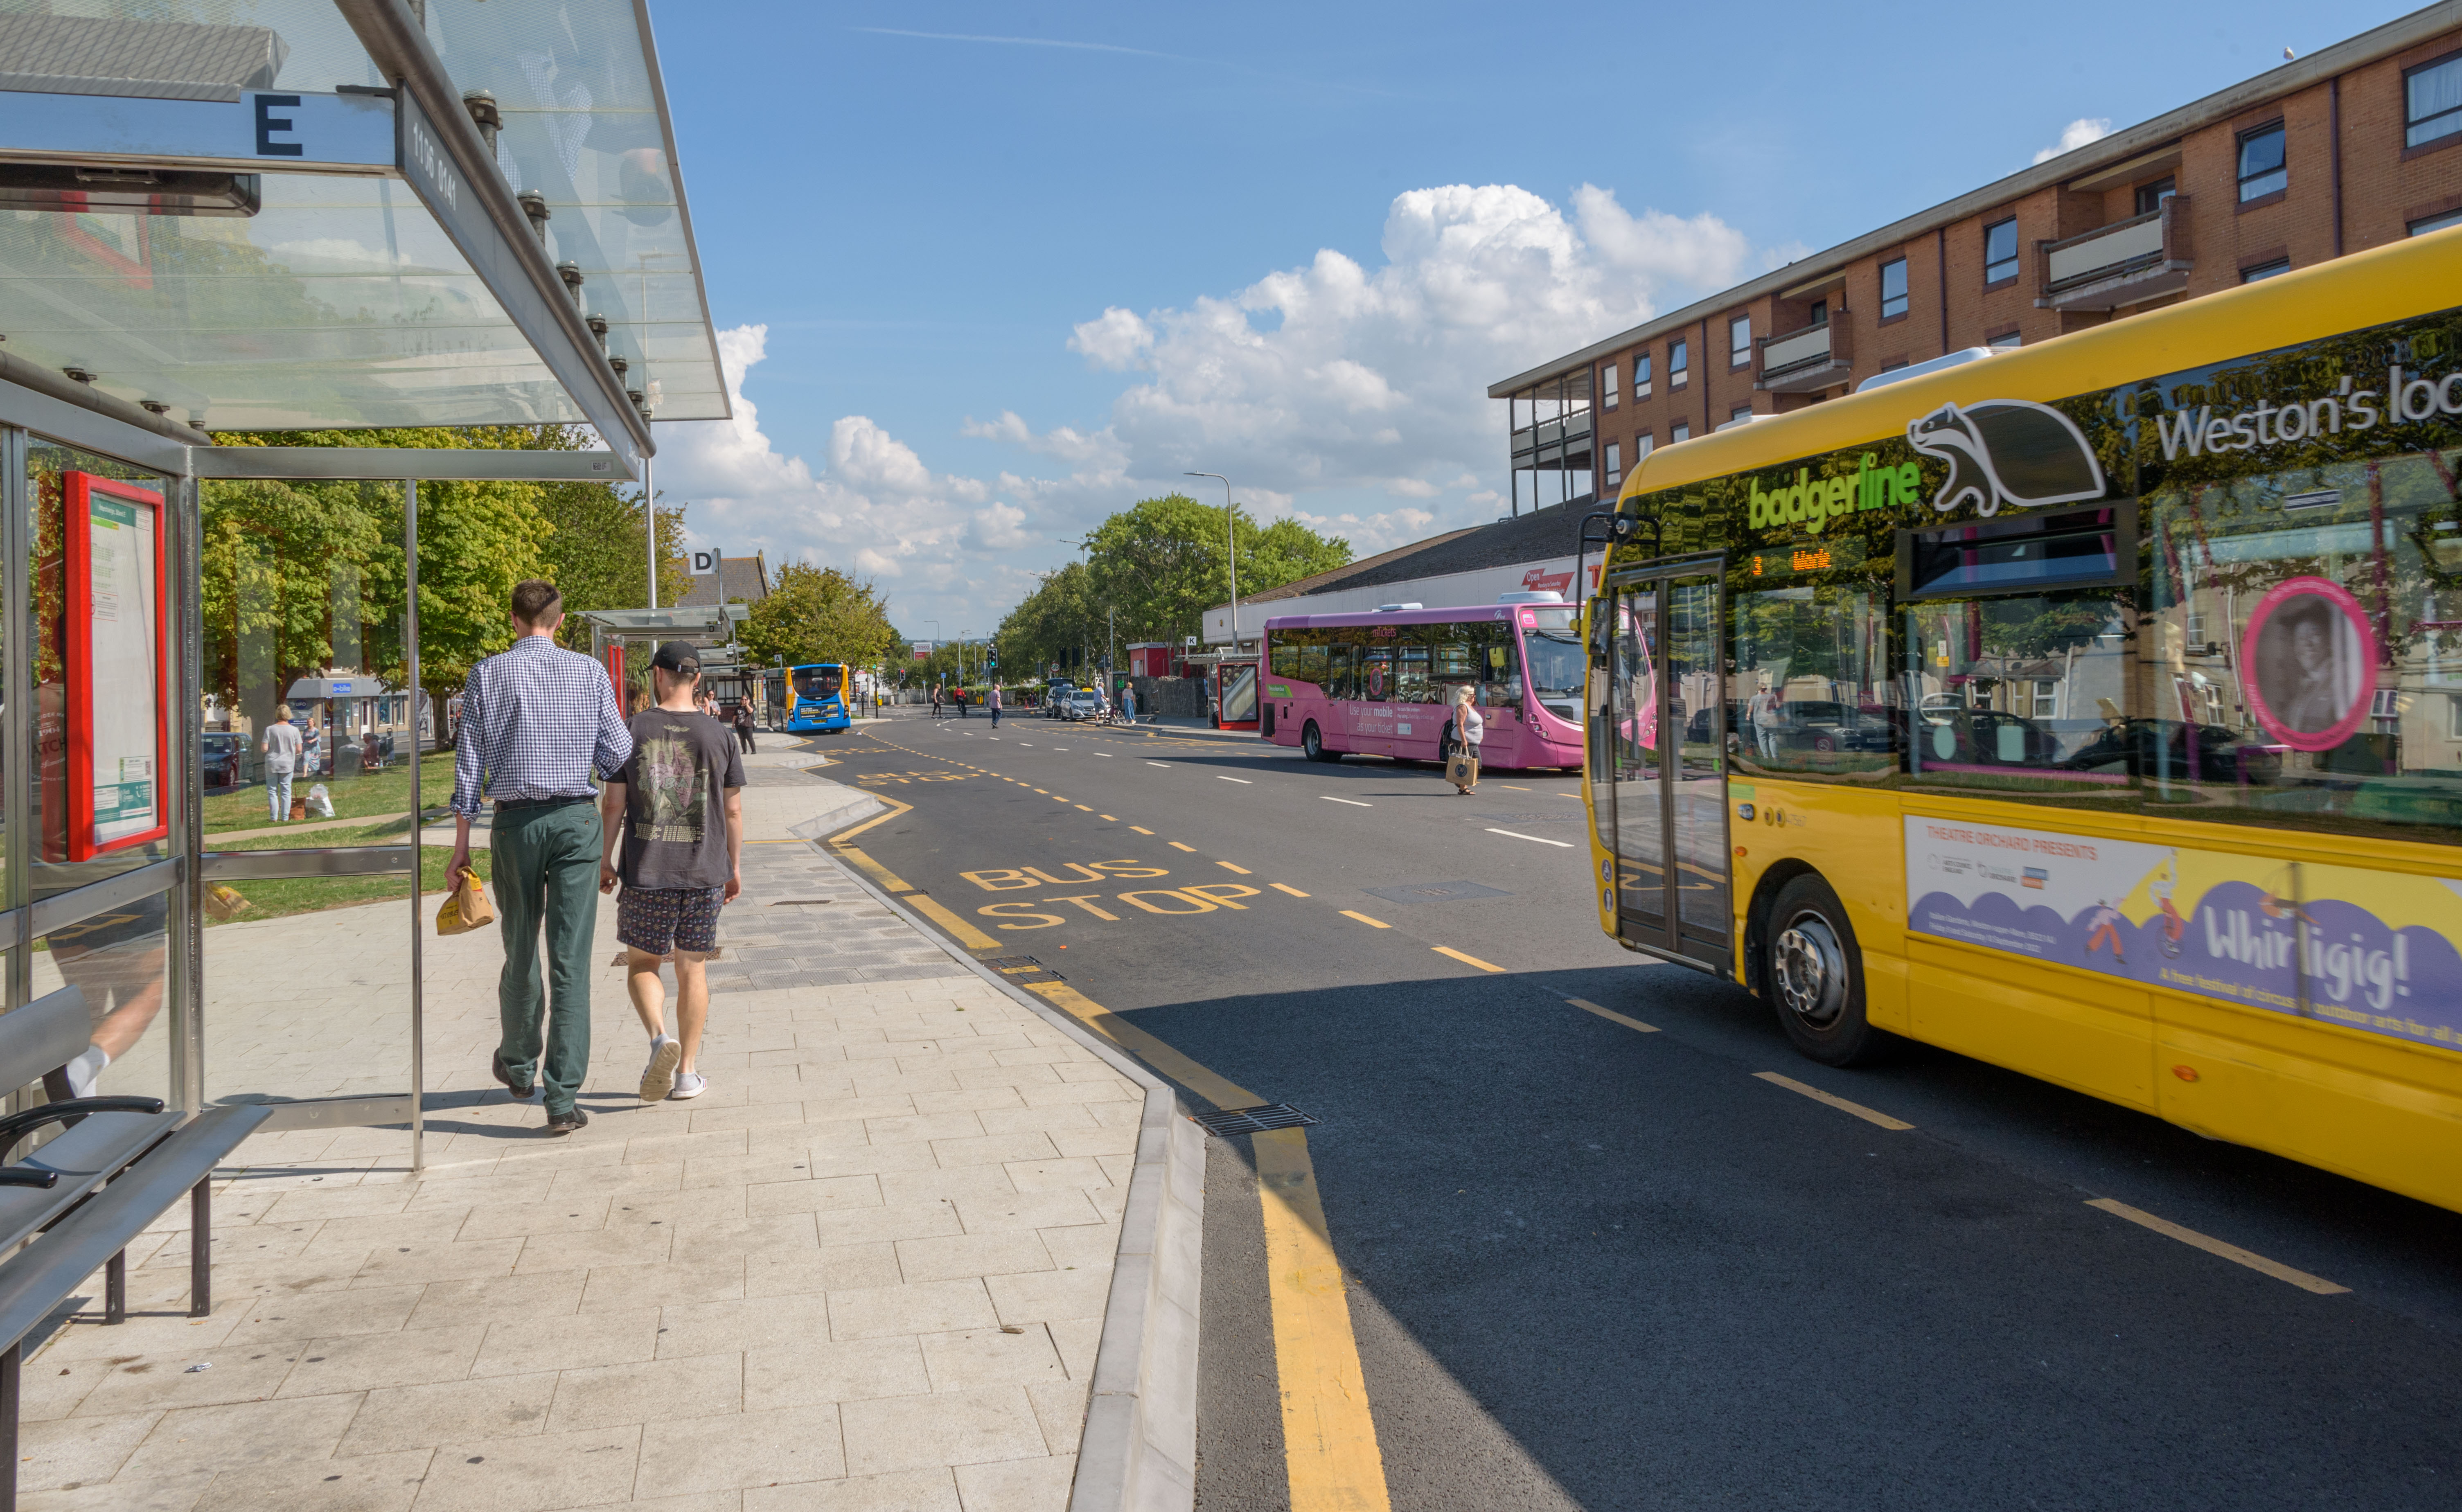 New 10 bus service introduced from September 